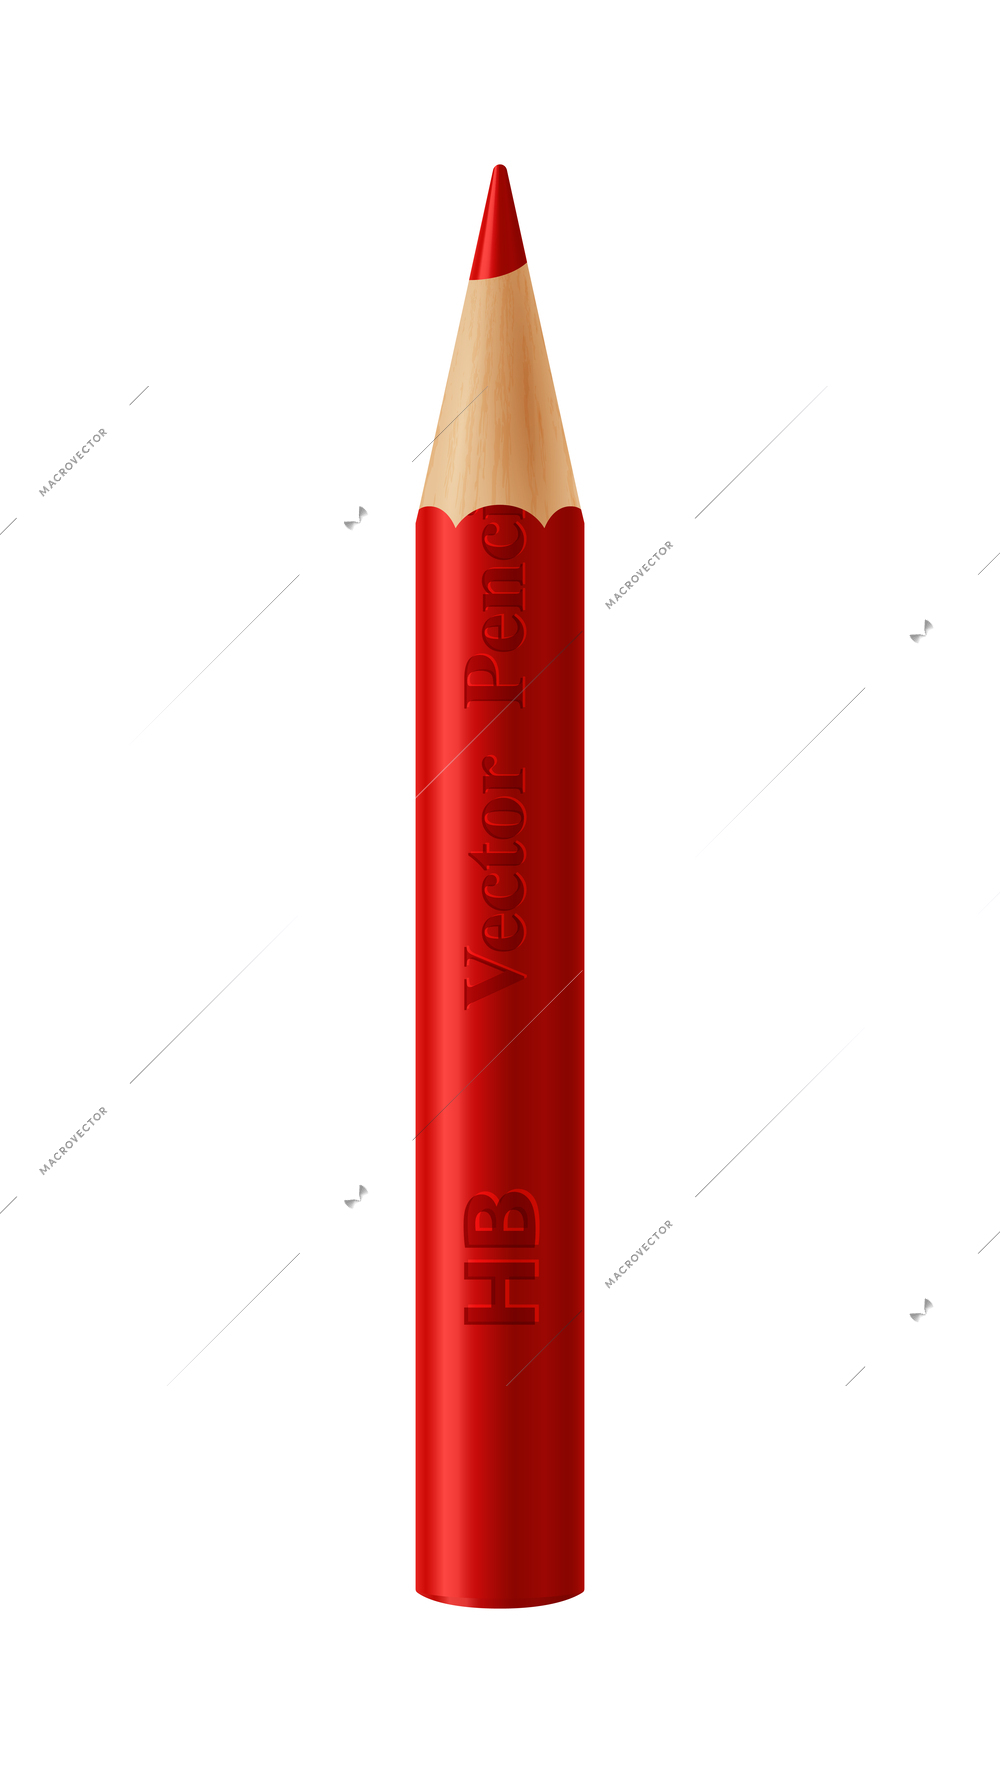 Realistic short red pencil isolated on white background vector illustration